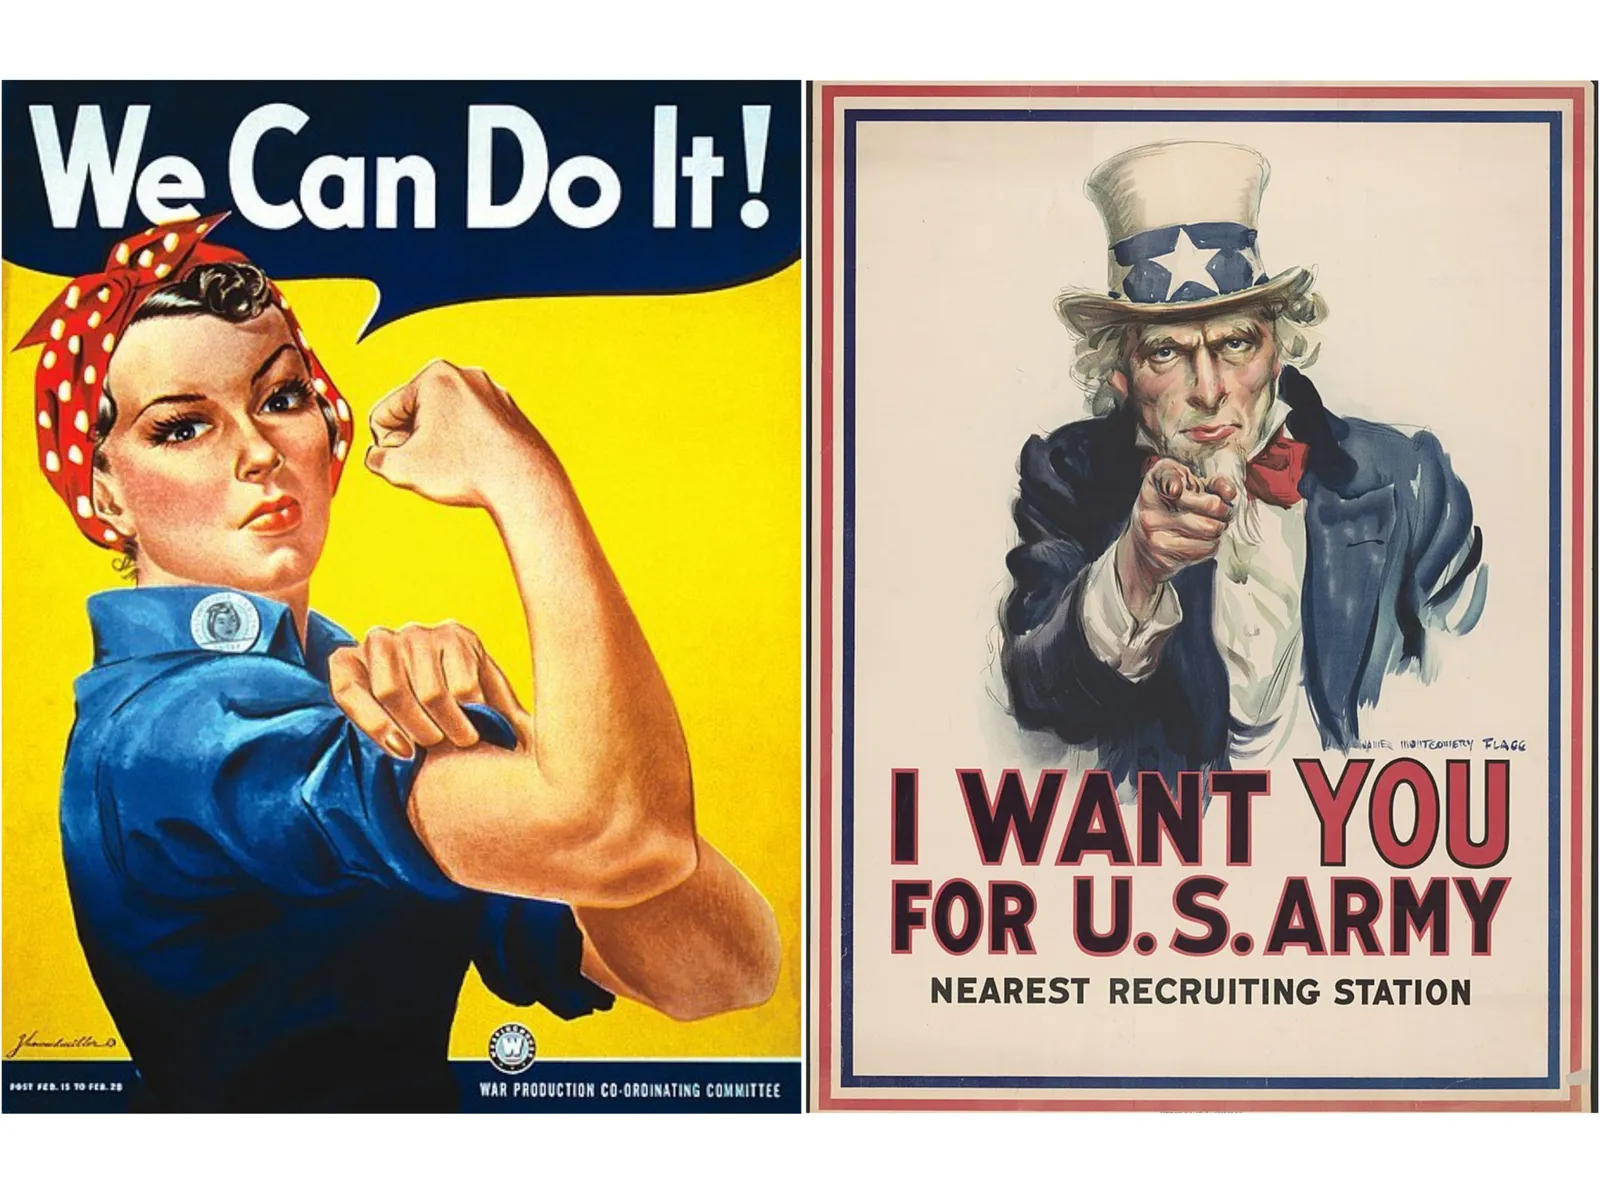 Rosie the Riveter and Uncle Sam: Two Portraits, Two Methods of